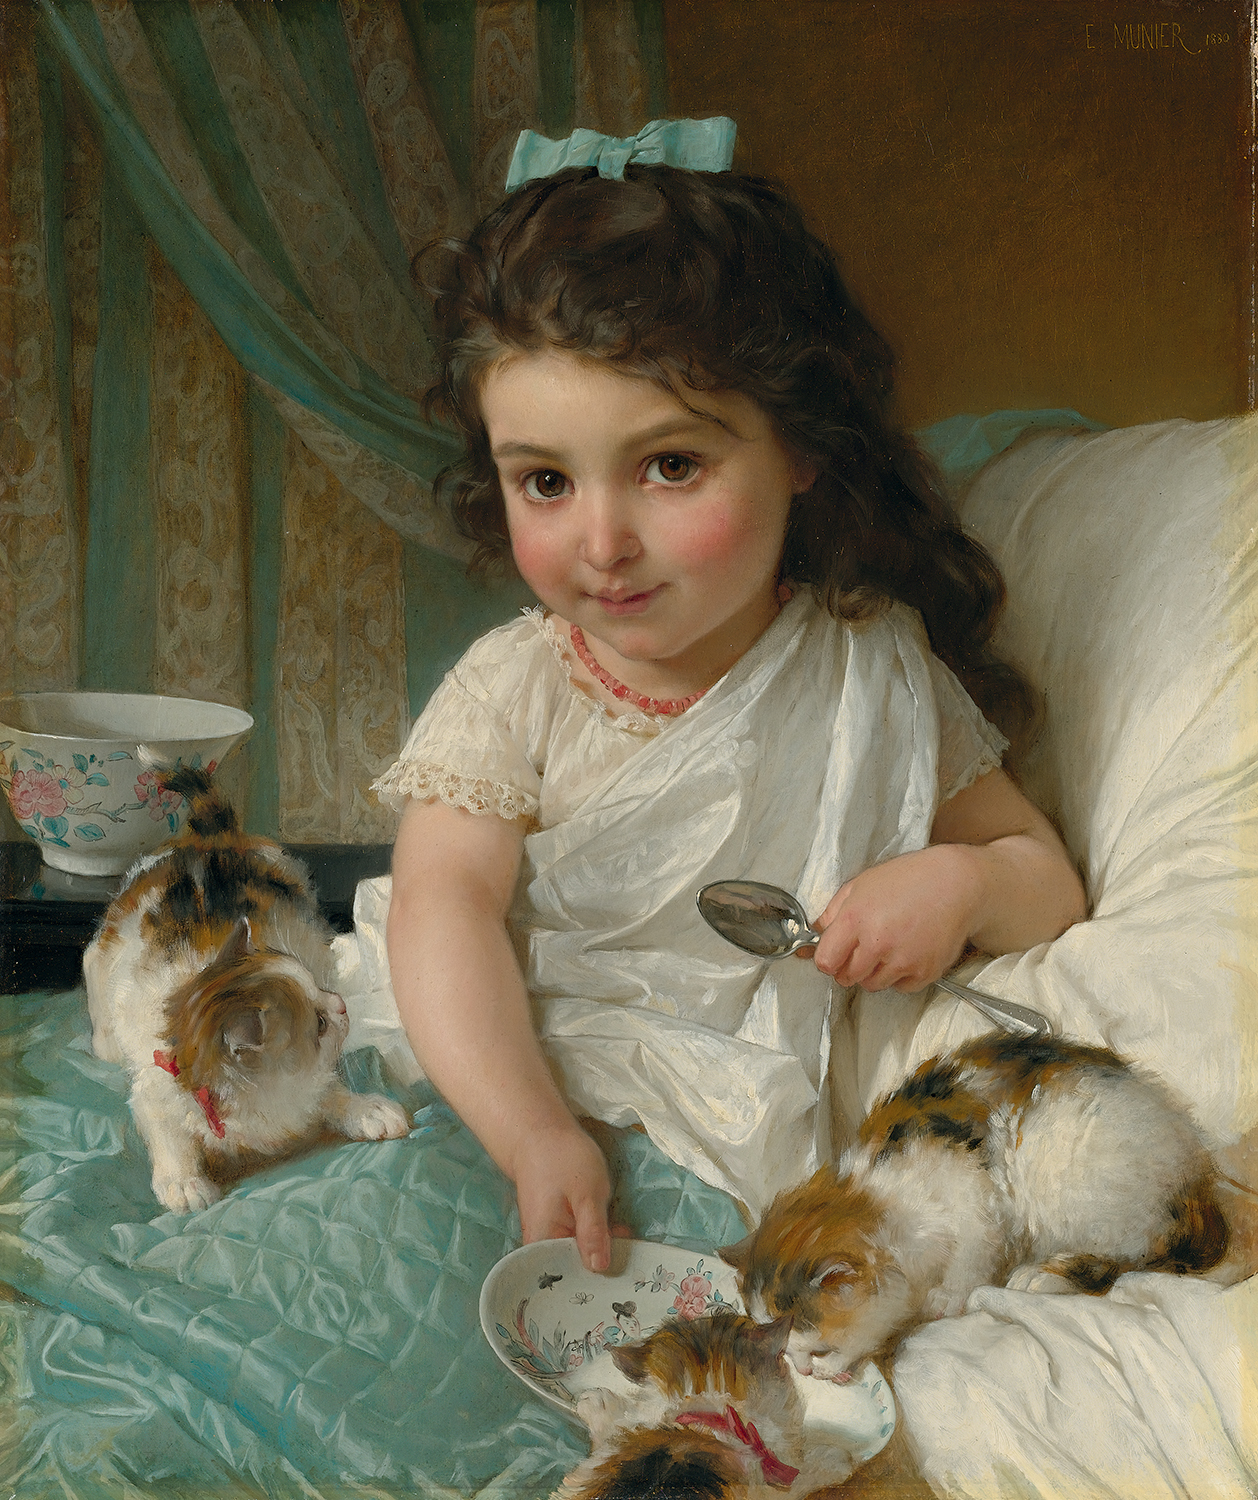 A young girl in bed with some kittens